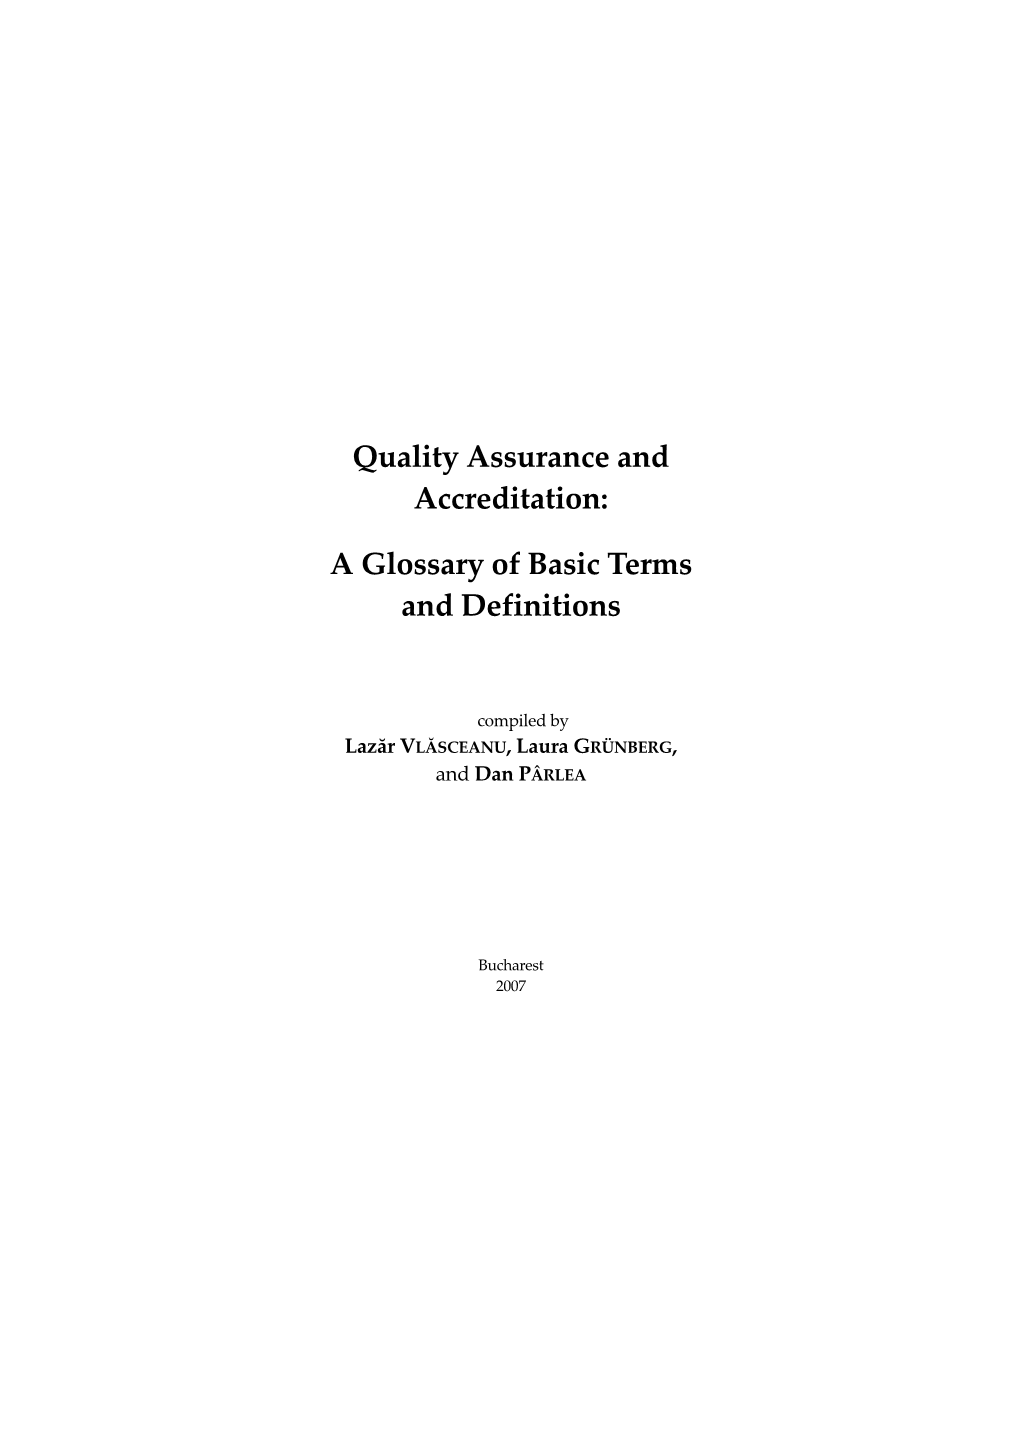 Quality Assurance and Accreditation: a Glossary of Basic Terms And